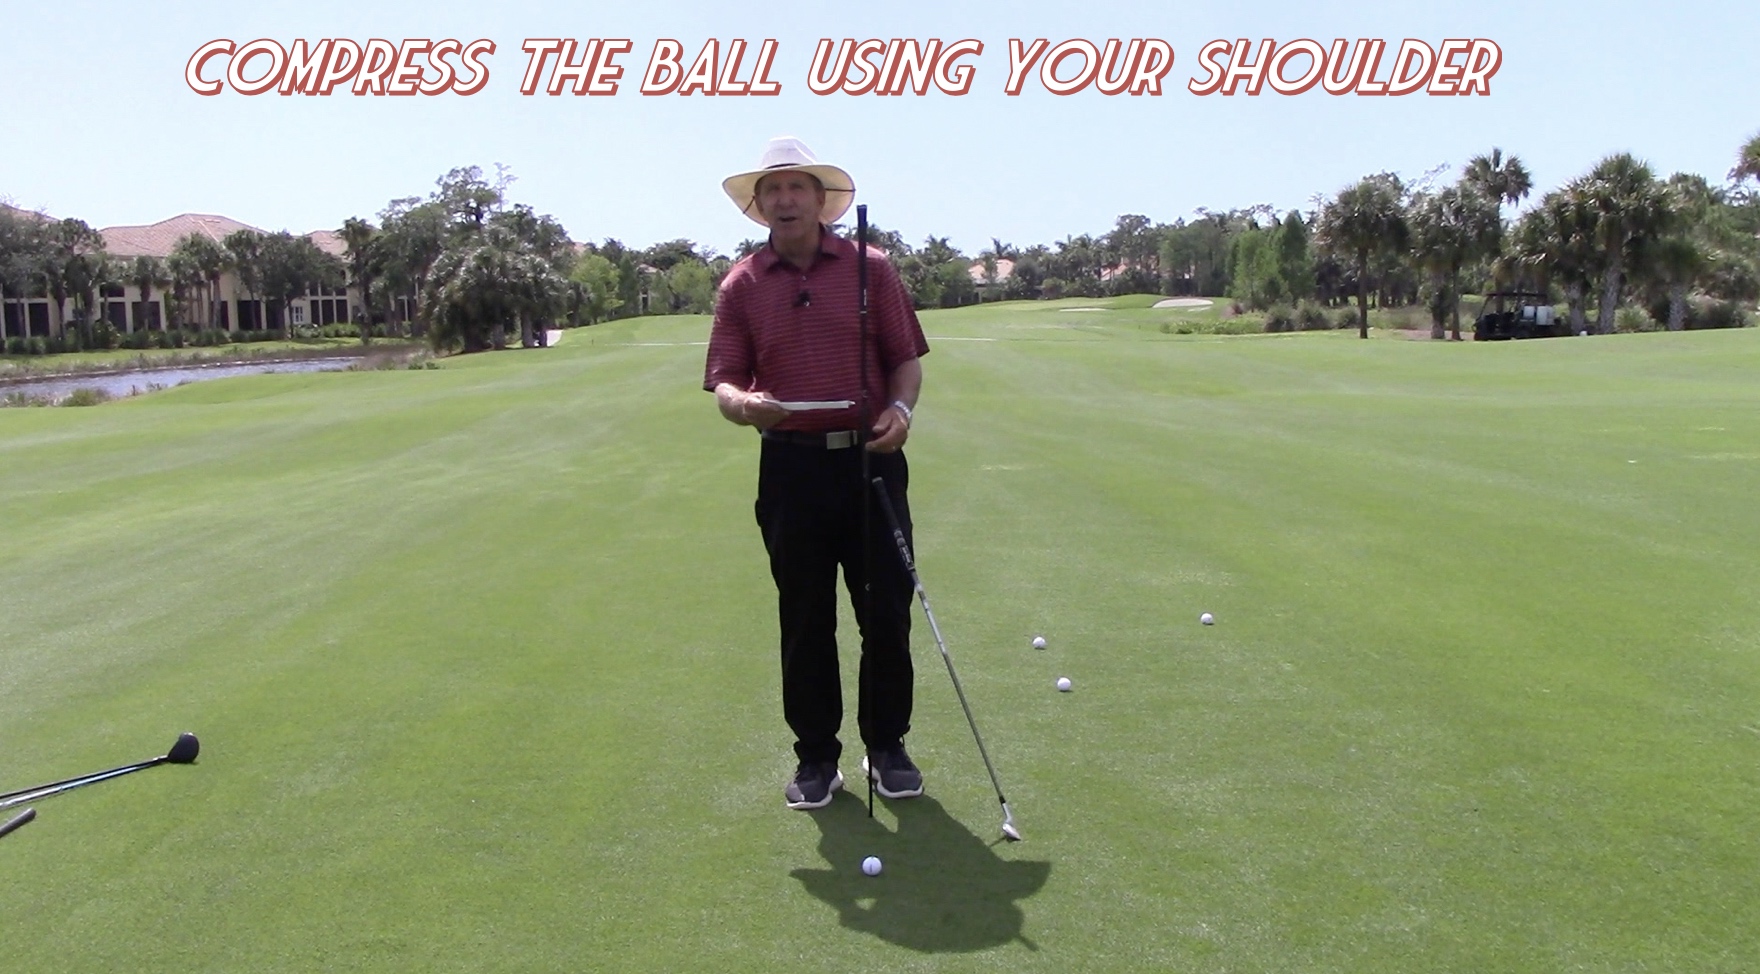 Using your shoulder to compress the ball